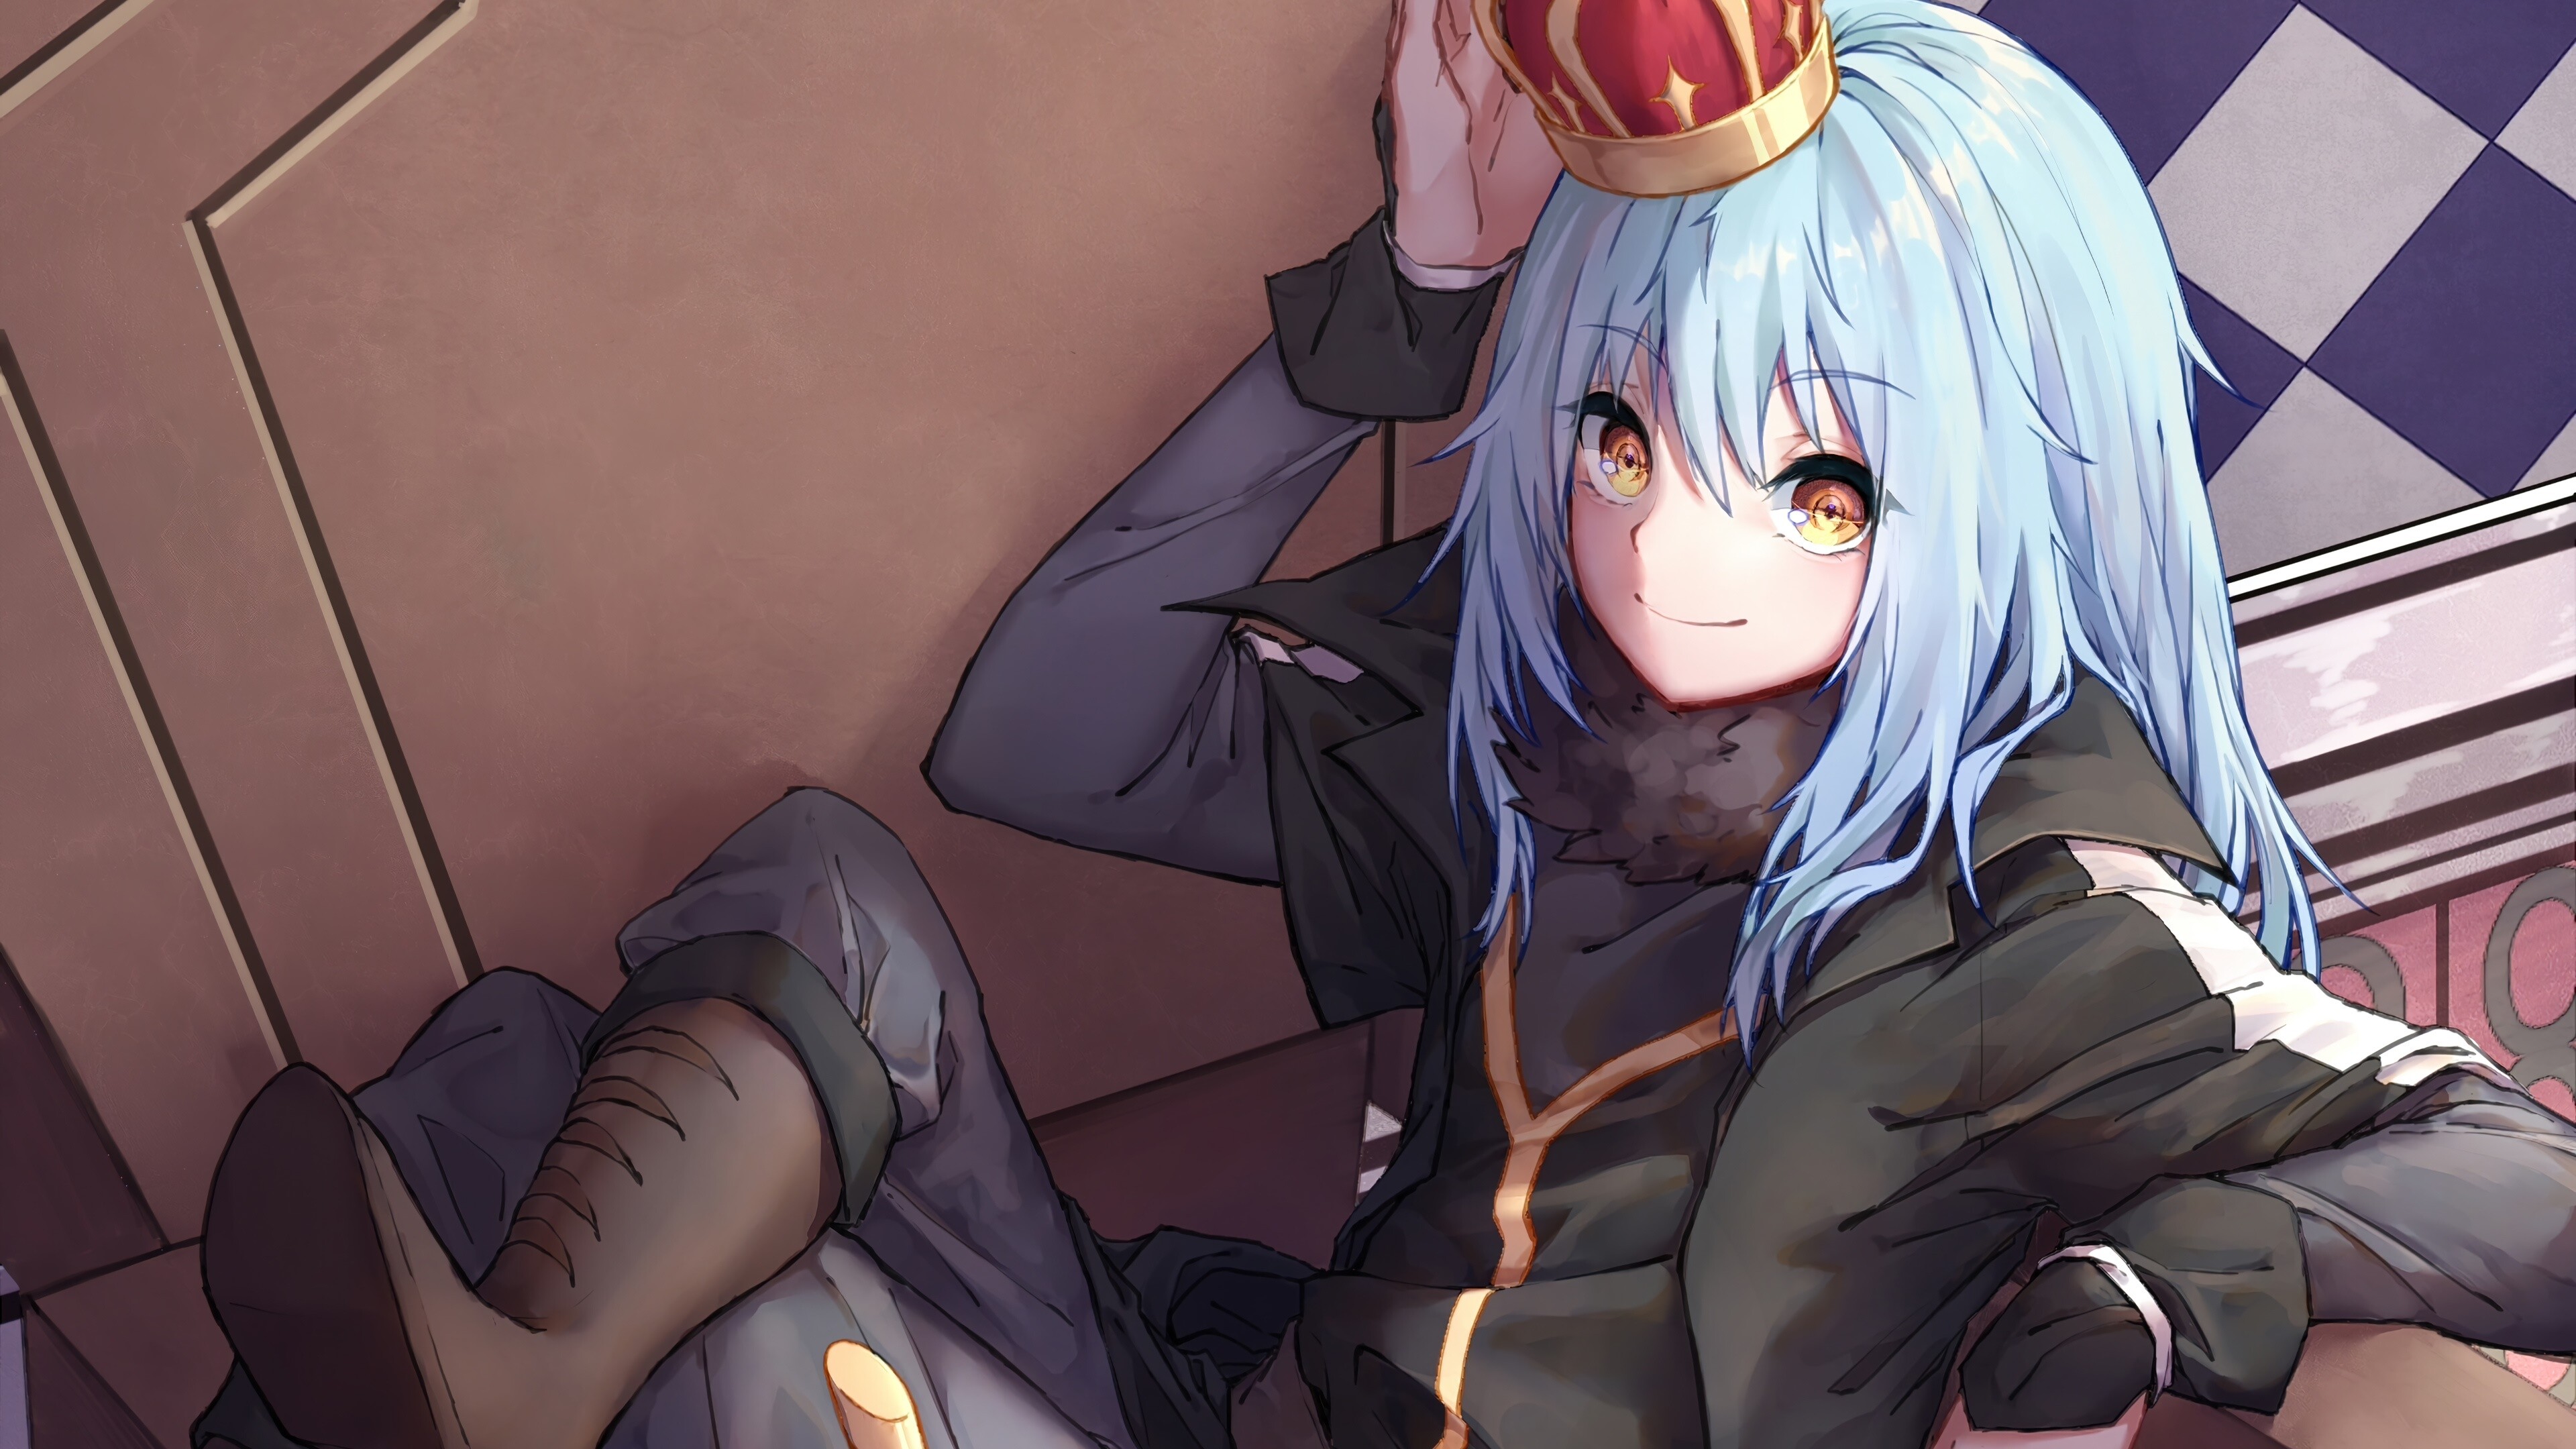 That Time I Got Reincarnated as a Slime: Great Demon Lord, A partner and best friend of the True Dragon Veldora Tempest. 3840x2160 4K Wallpaper.